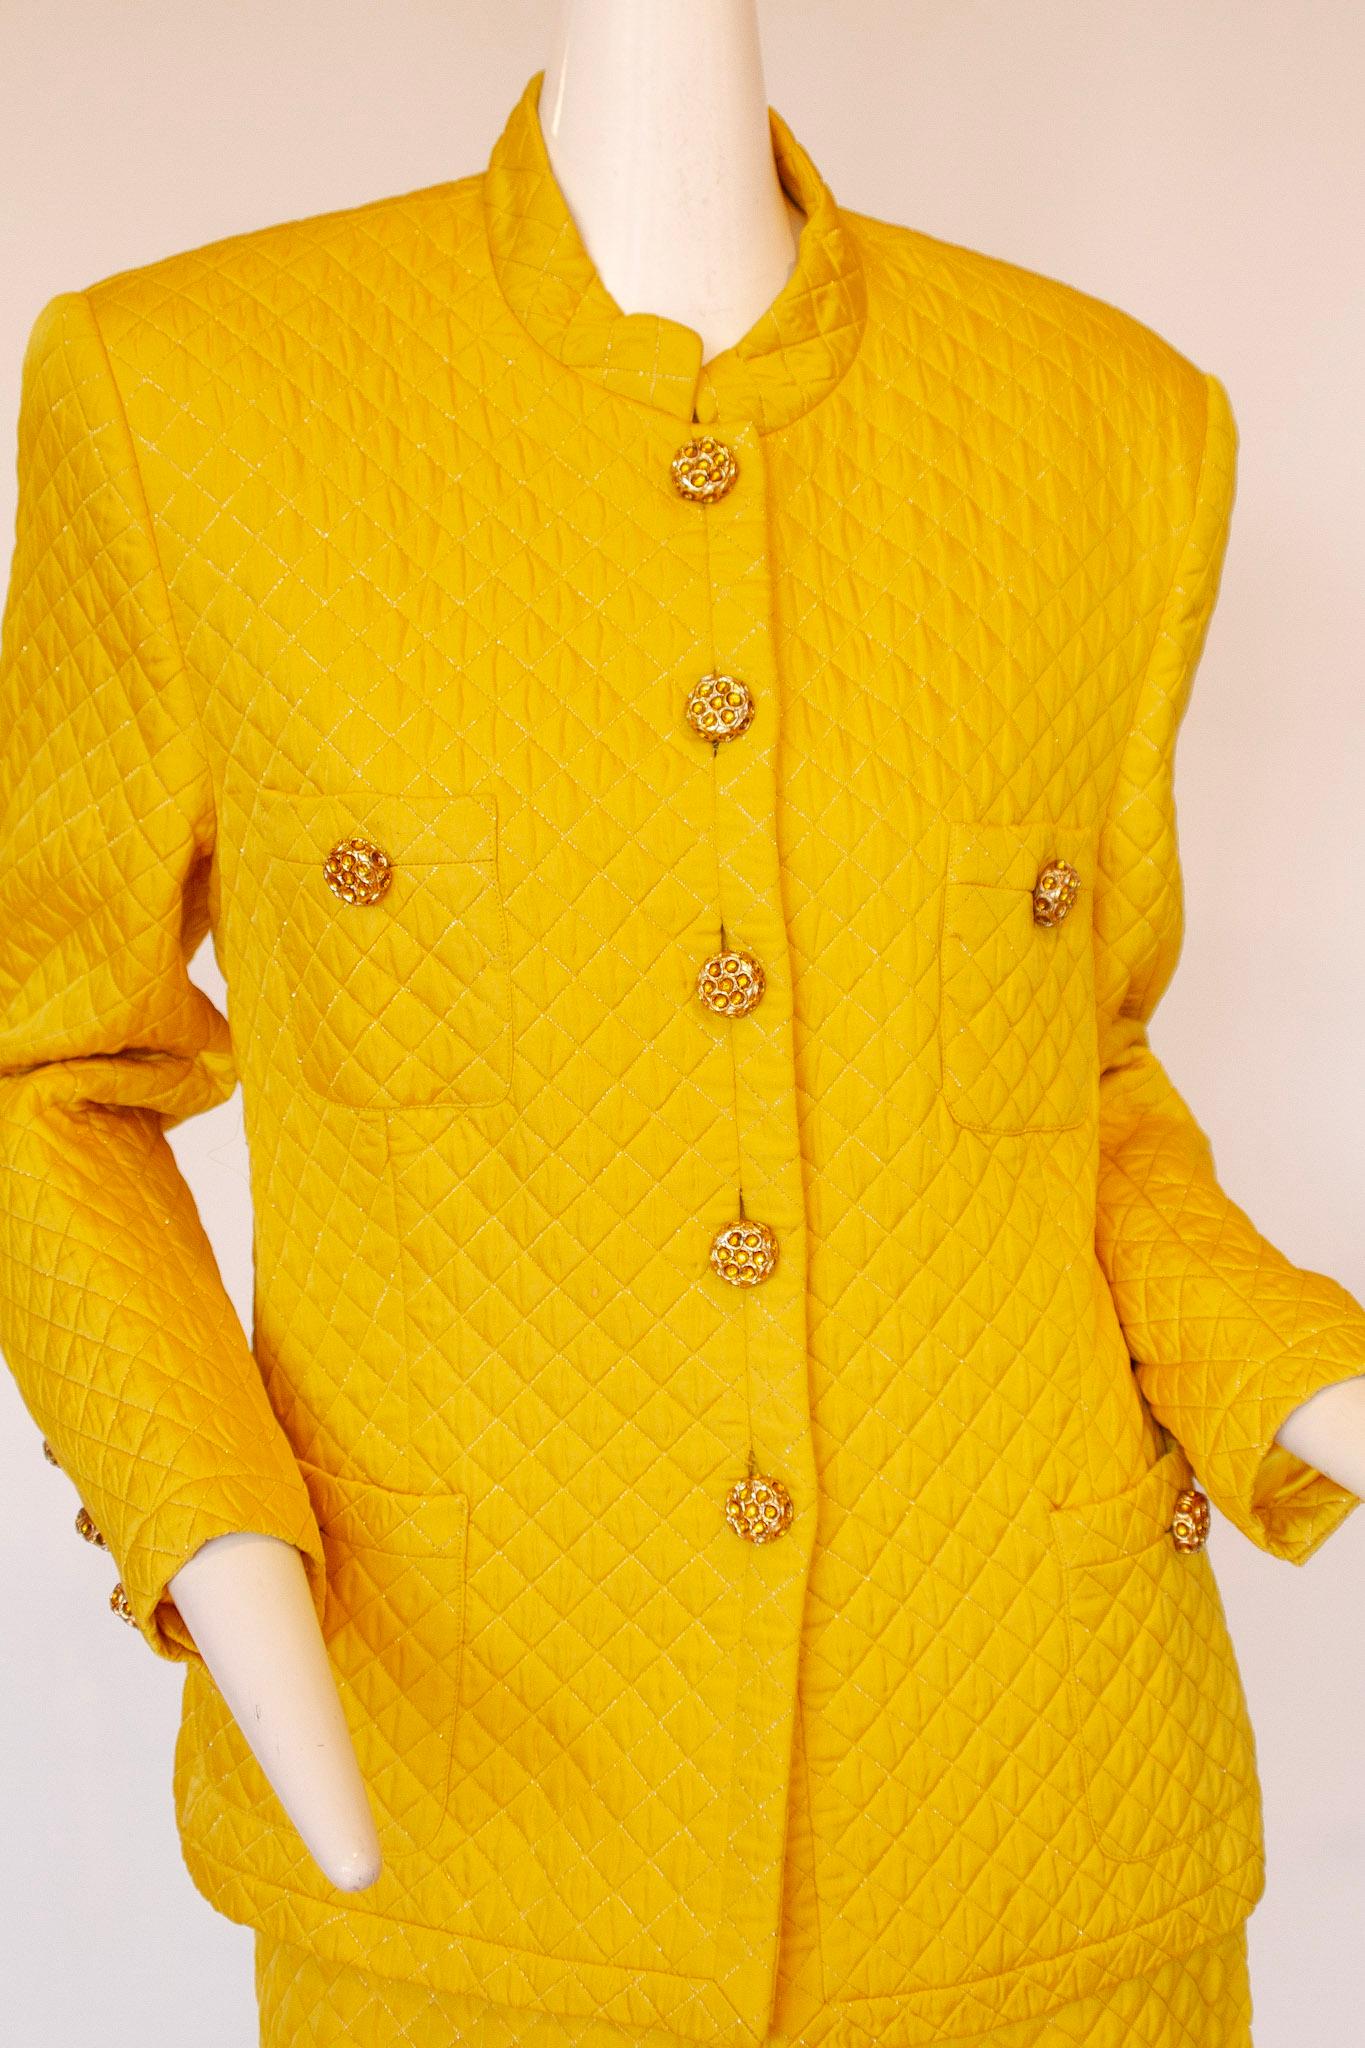 Escada by Margaretha Ley yellow quilted skirt suit. Made in Germany.

EU 42